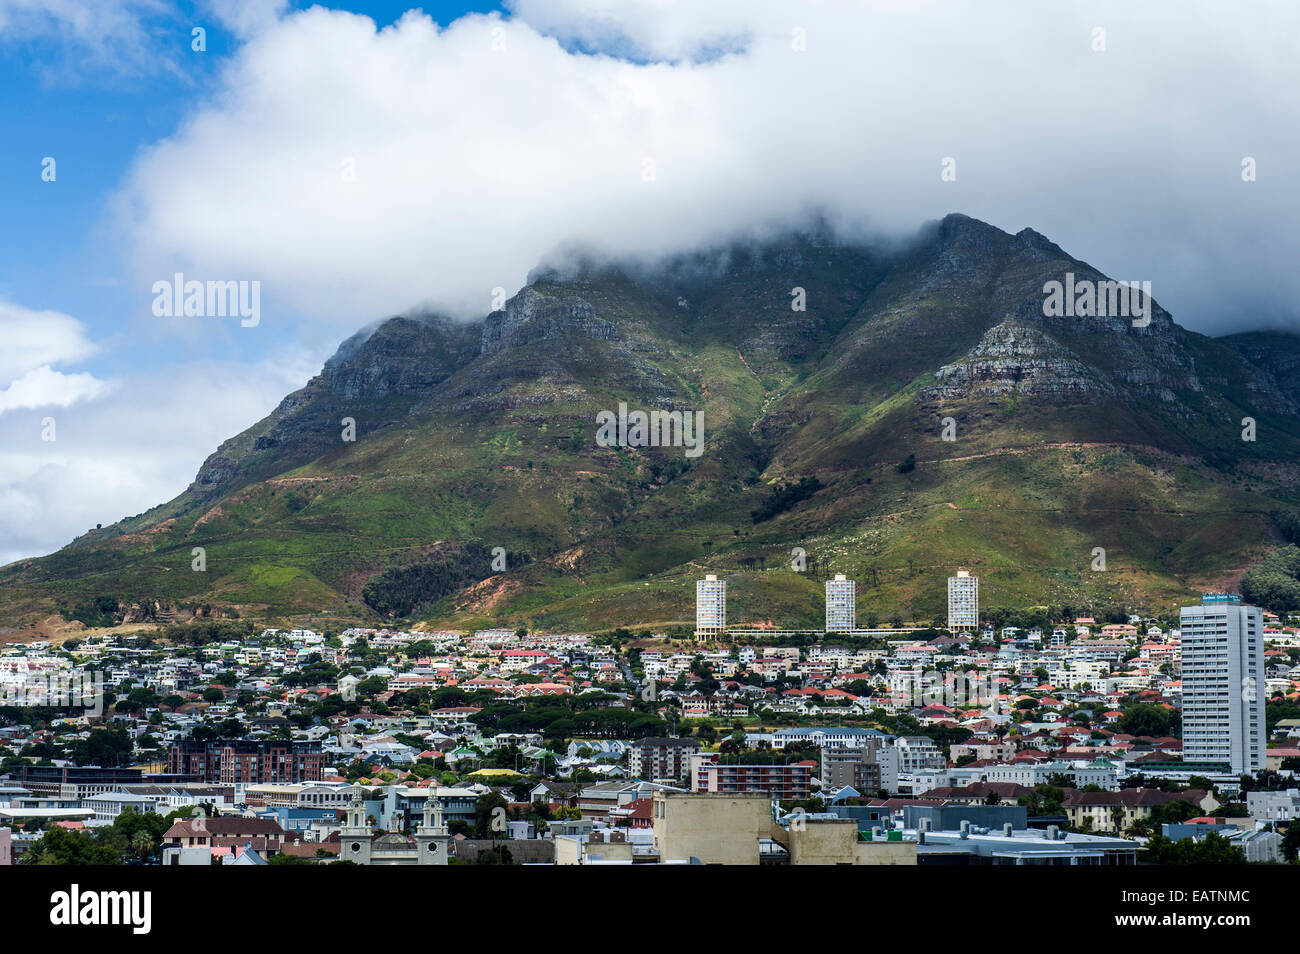 Sprawling suburbs and high-rise apartments below Table Mountain. Stock Photo